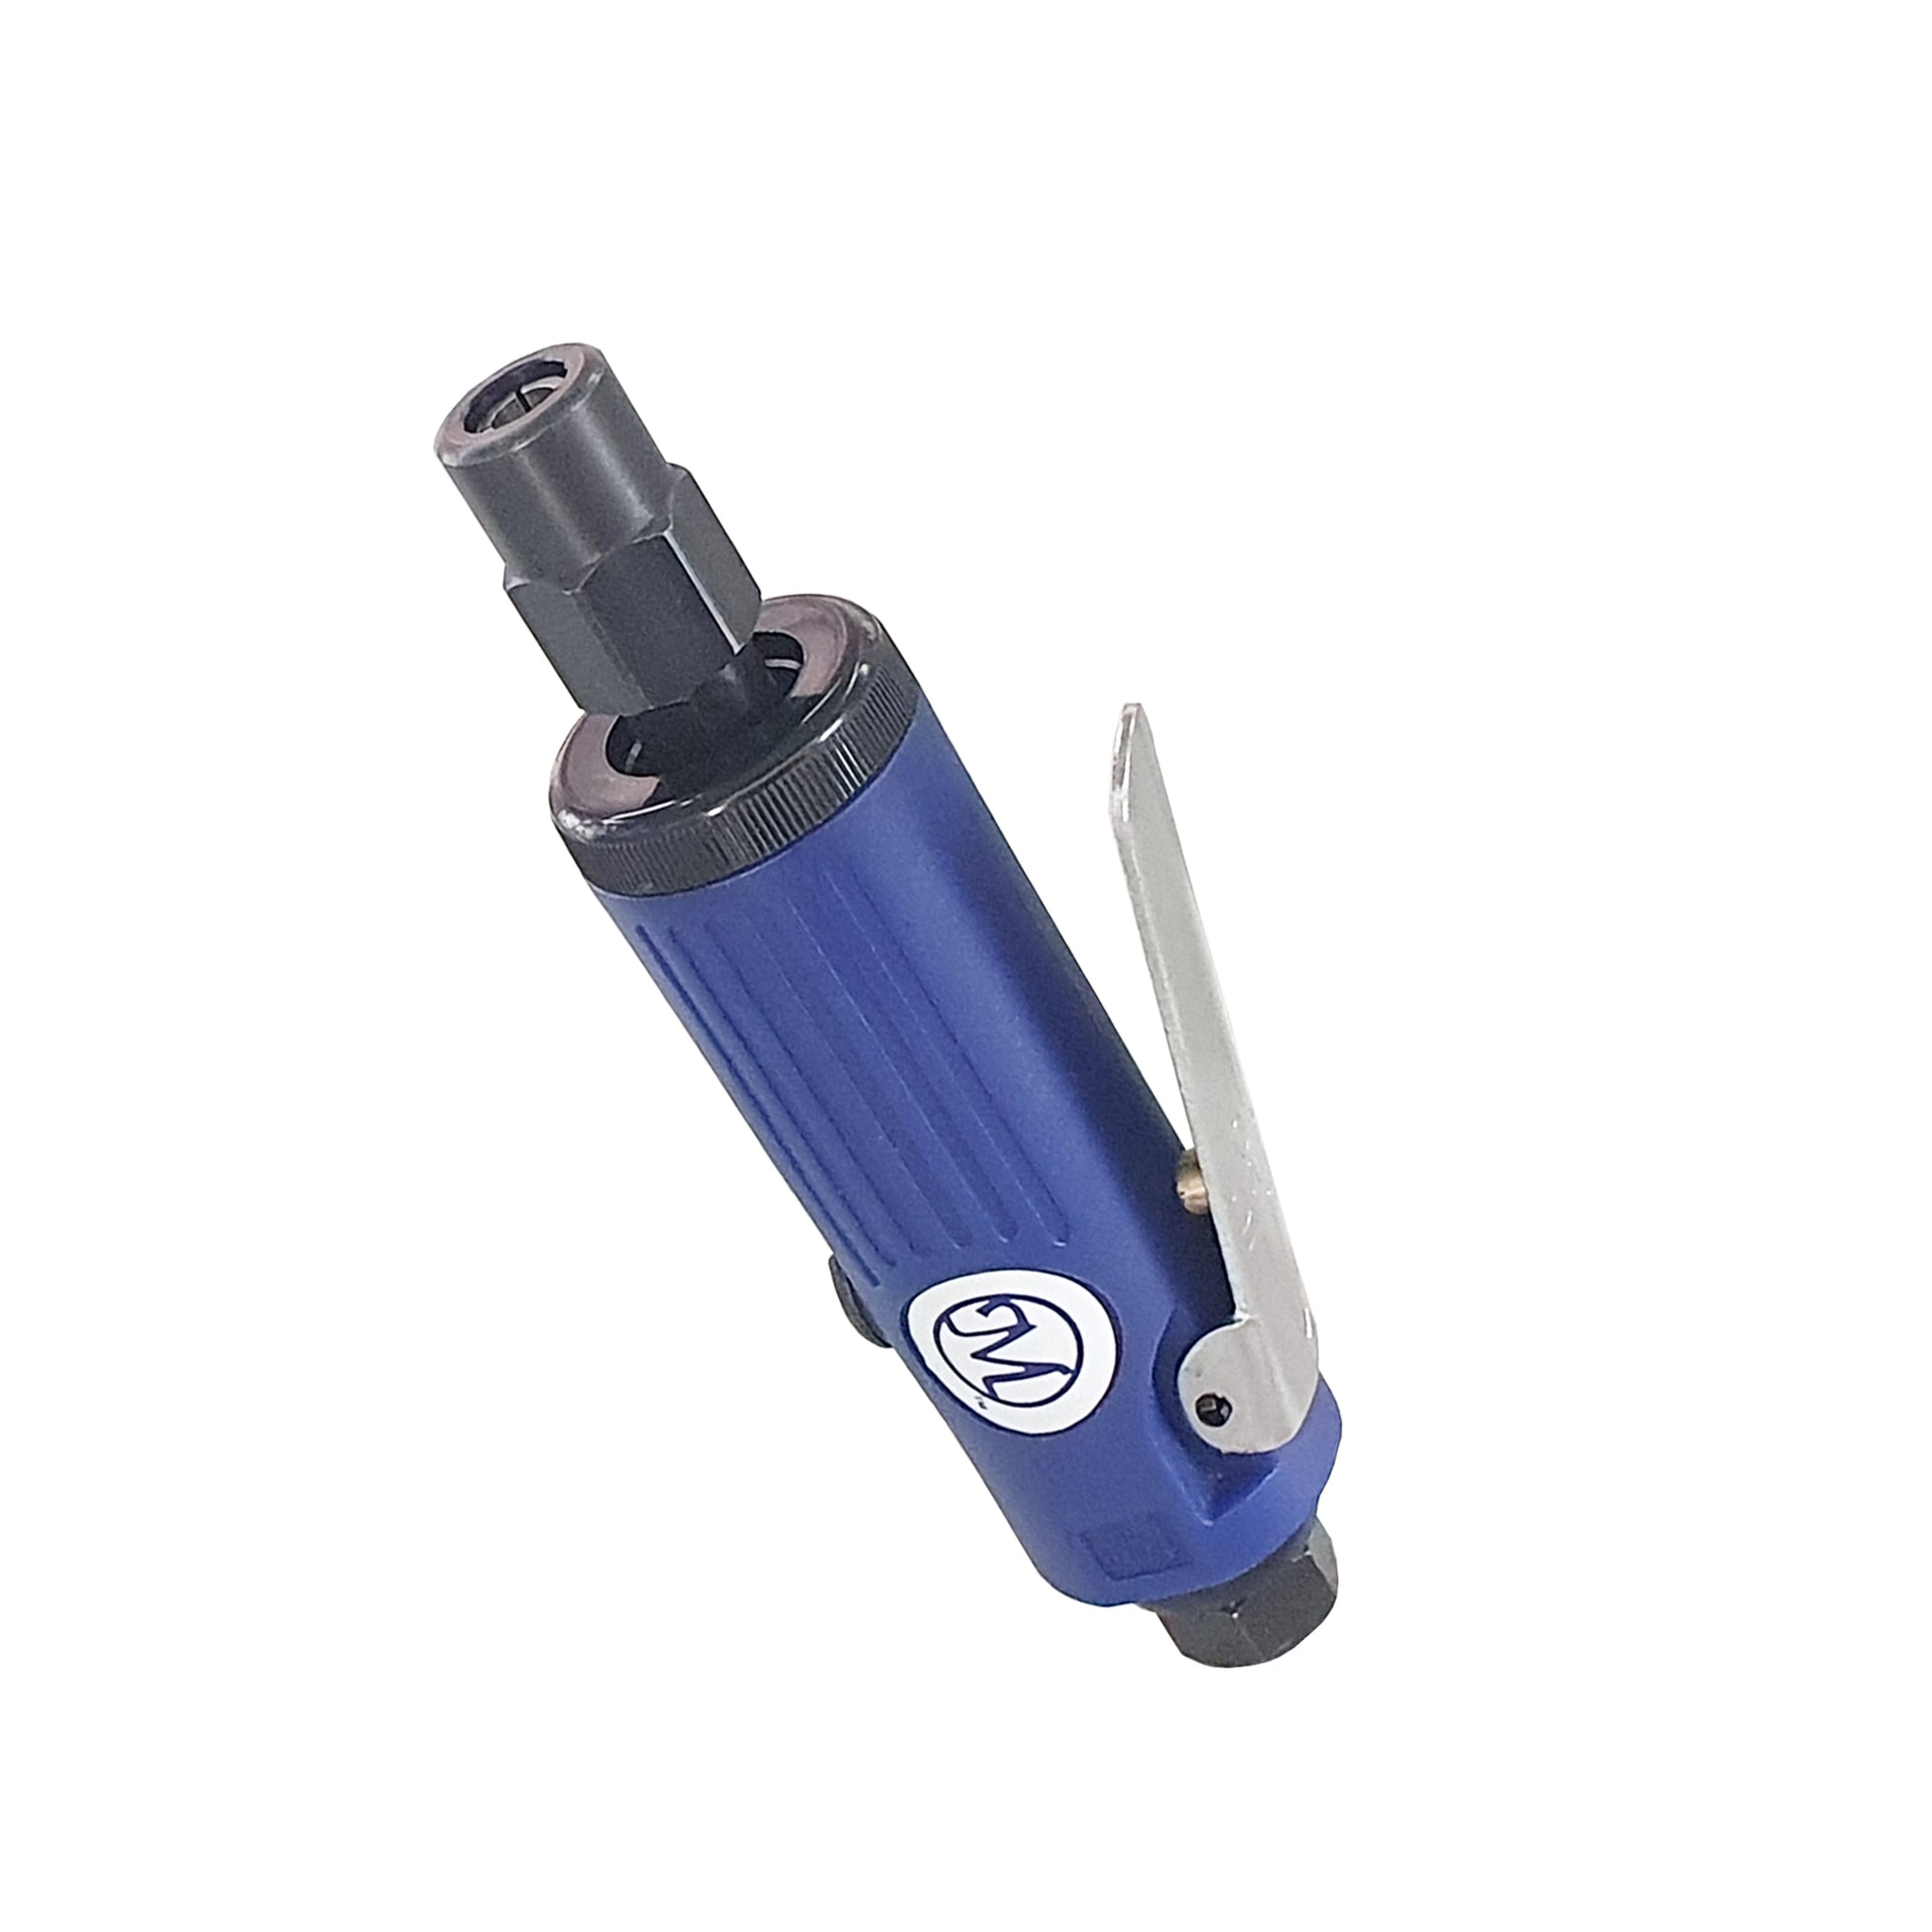 Mini Composite Gearless Straight Air Die Grinder with 1/4 and 1/8 inch collets, 25000RPM - 36230 - USD $150 - Master Palm Pneumatic